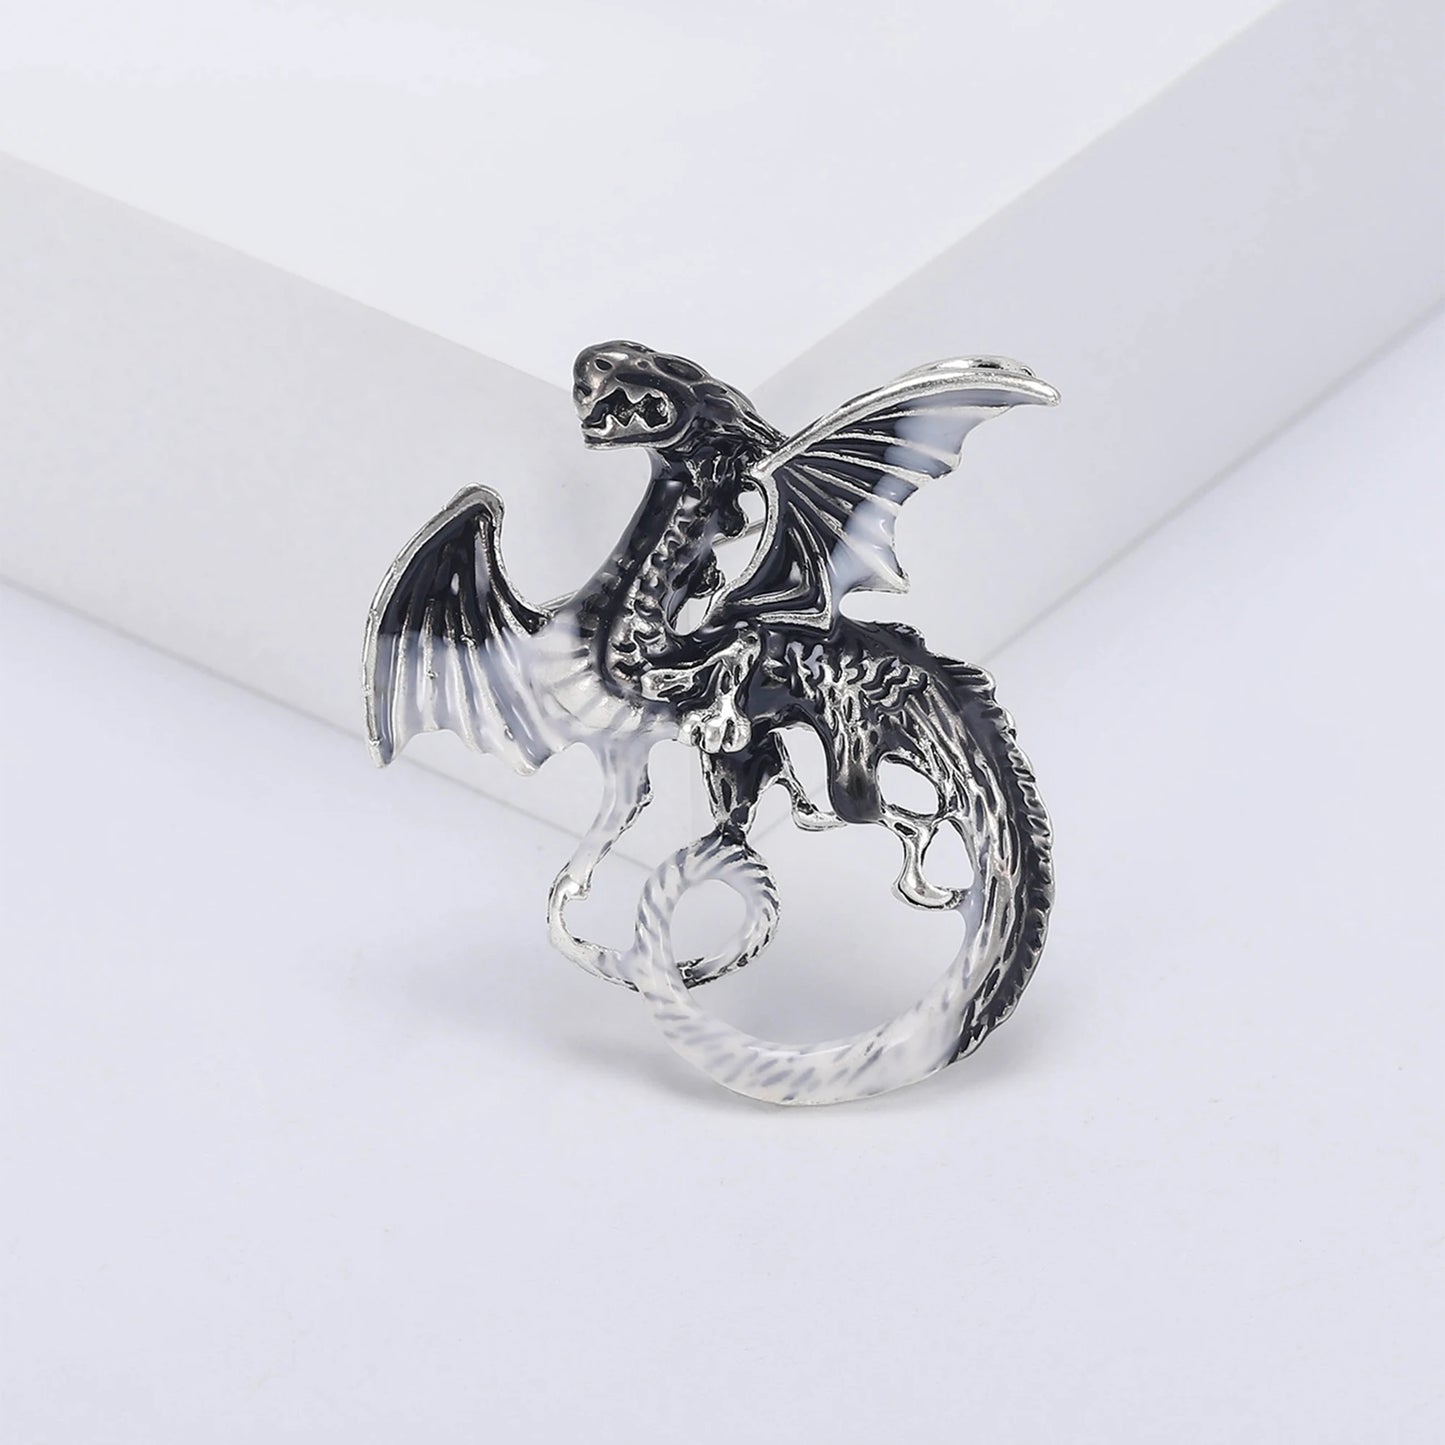 Enamel Dragon Brooches - Mythical Pieces Black Dragonnette